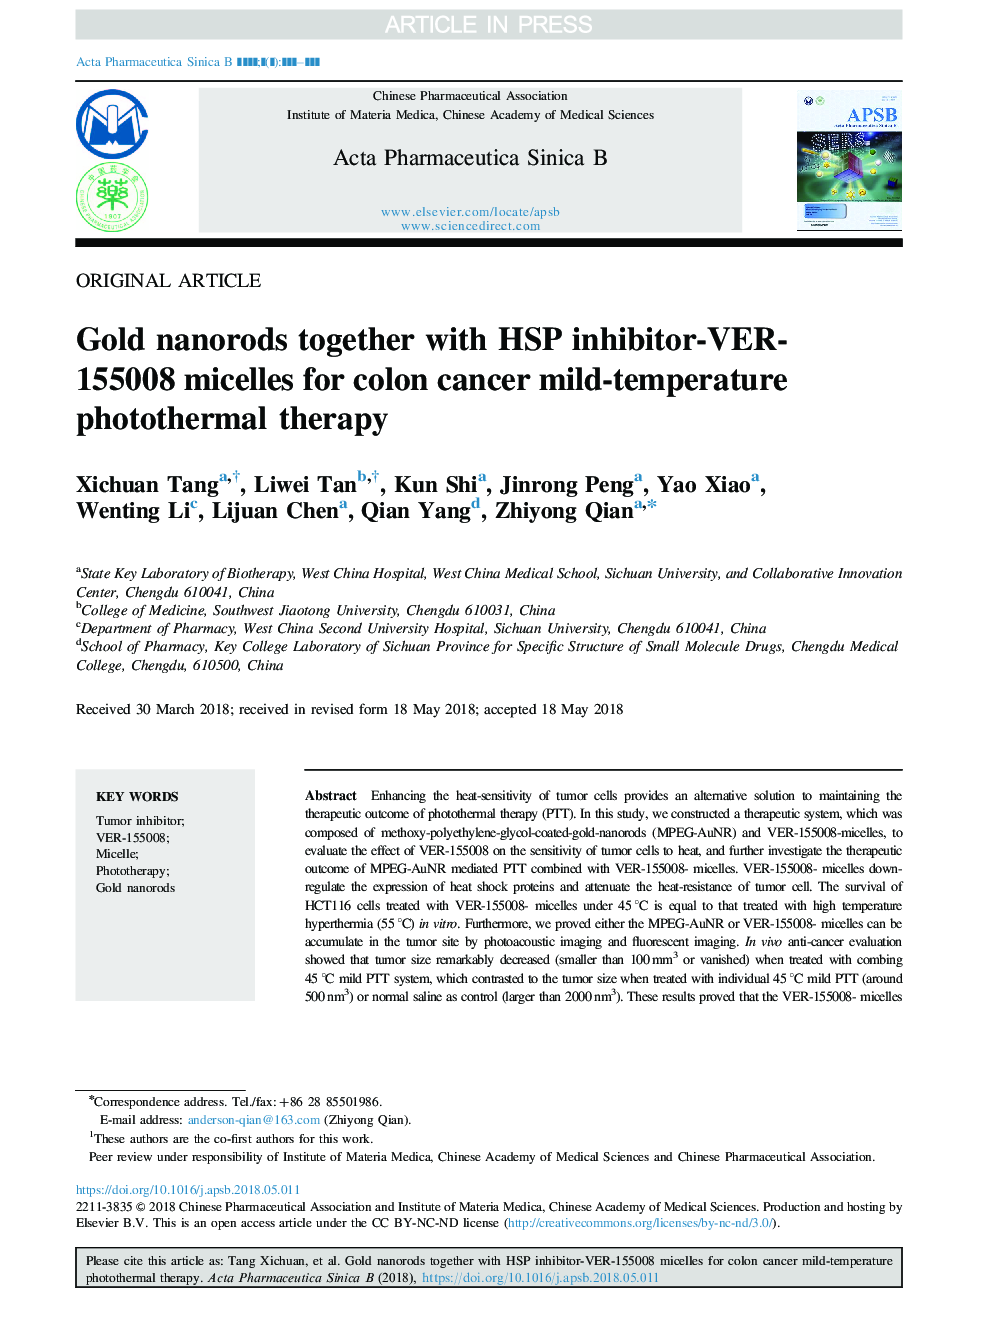 Gold nanorods together with HSP inhibitor-VER-155008 micelles for colon cancer mild-temperature photothermal therapy